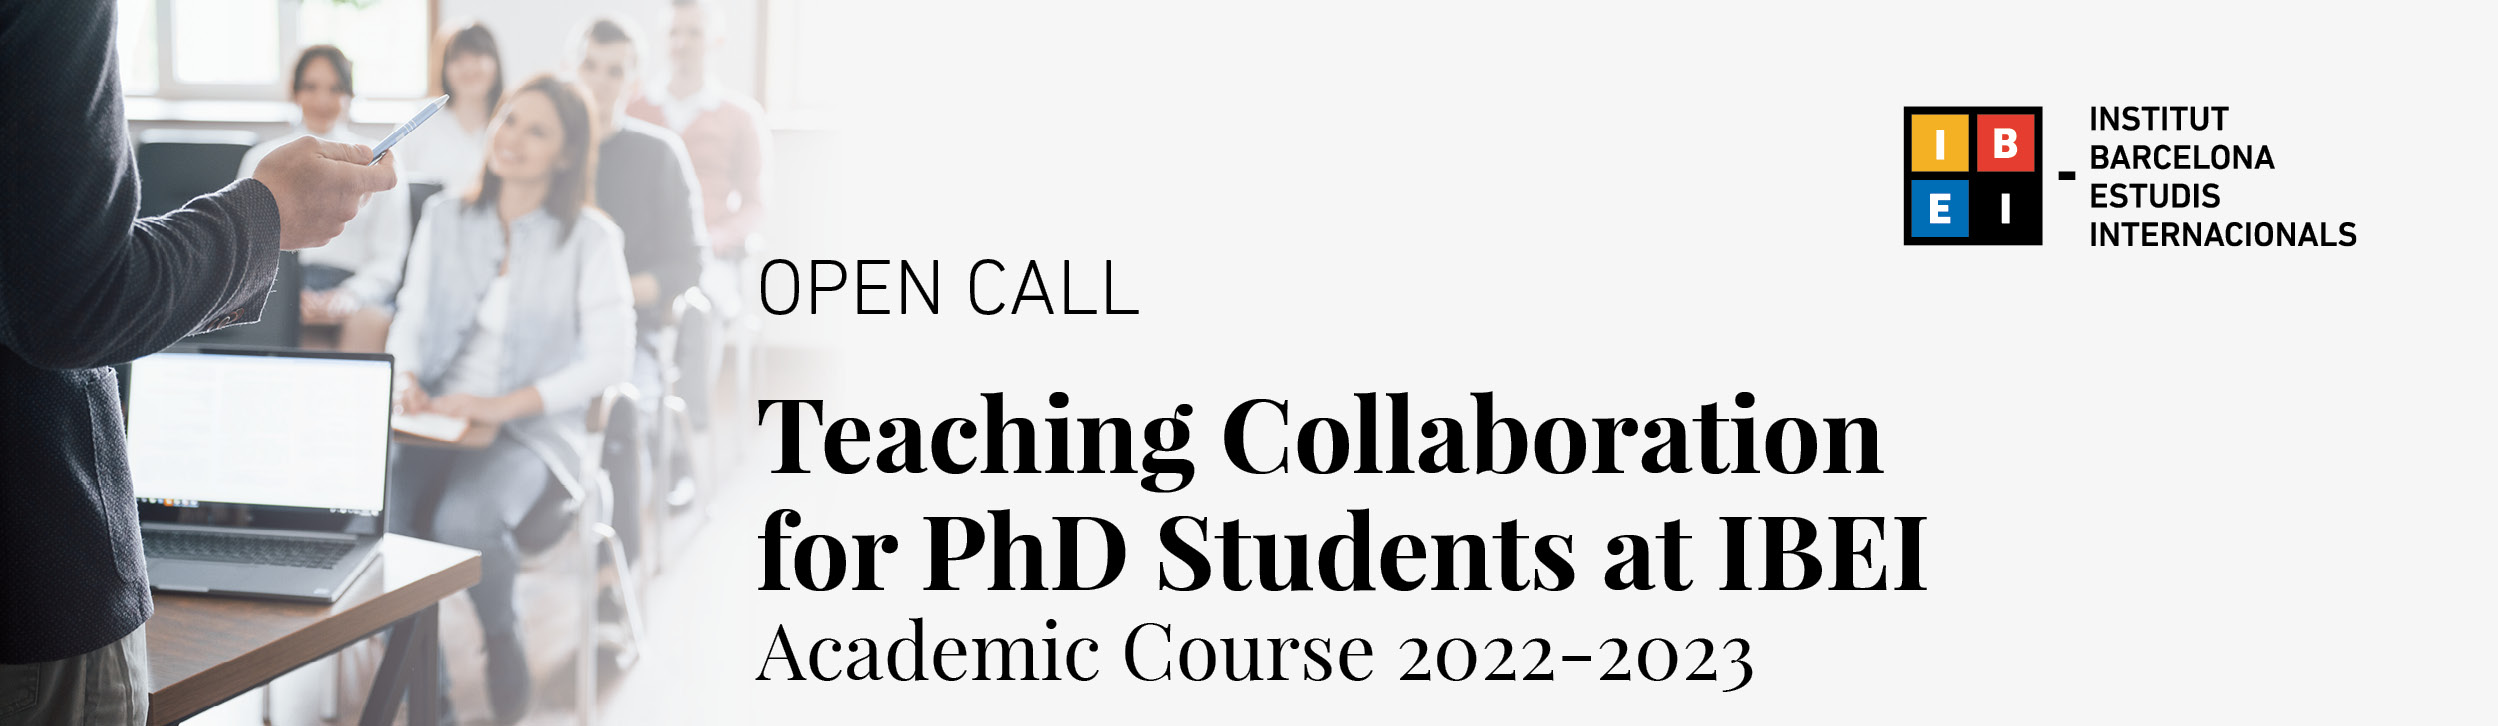 Teaching Collaboration for PhD Students at IBEI_capçalera